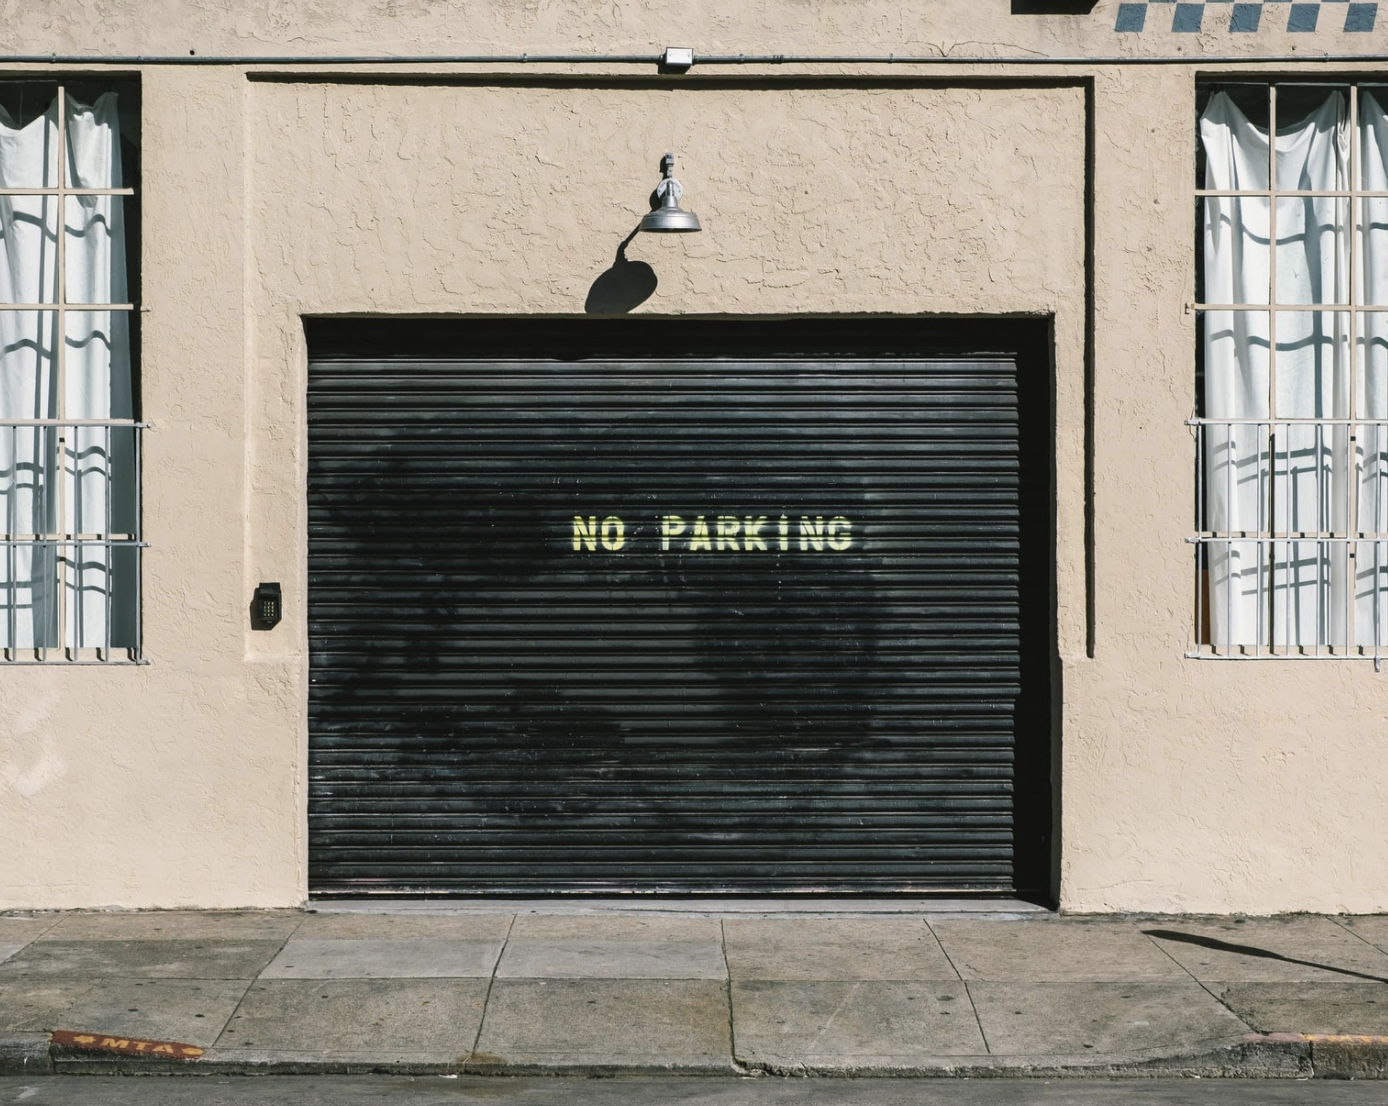 A garage with no parking on the front